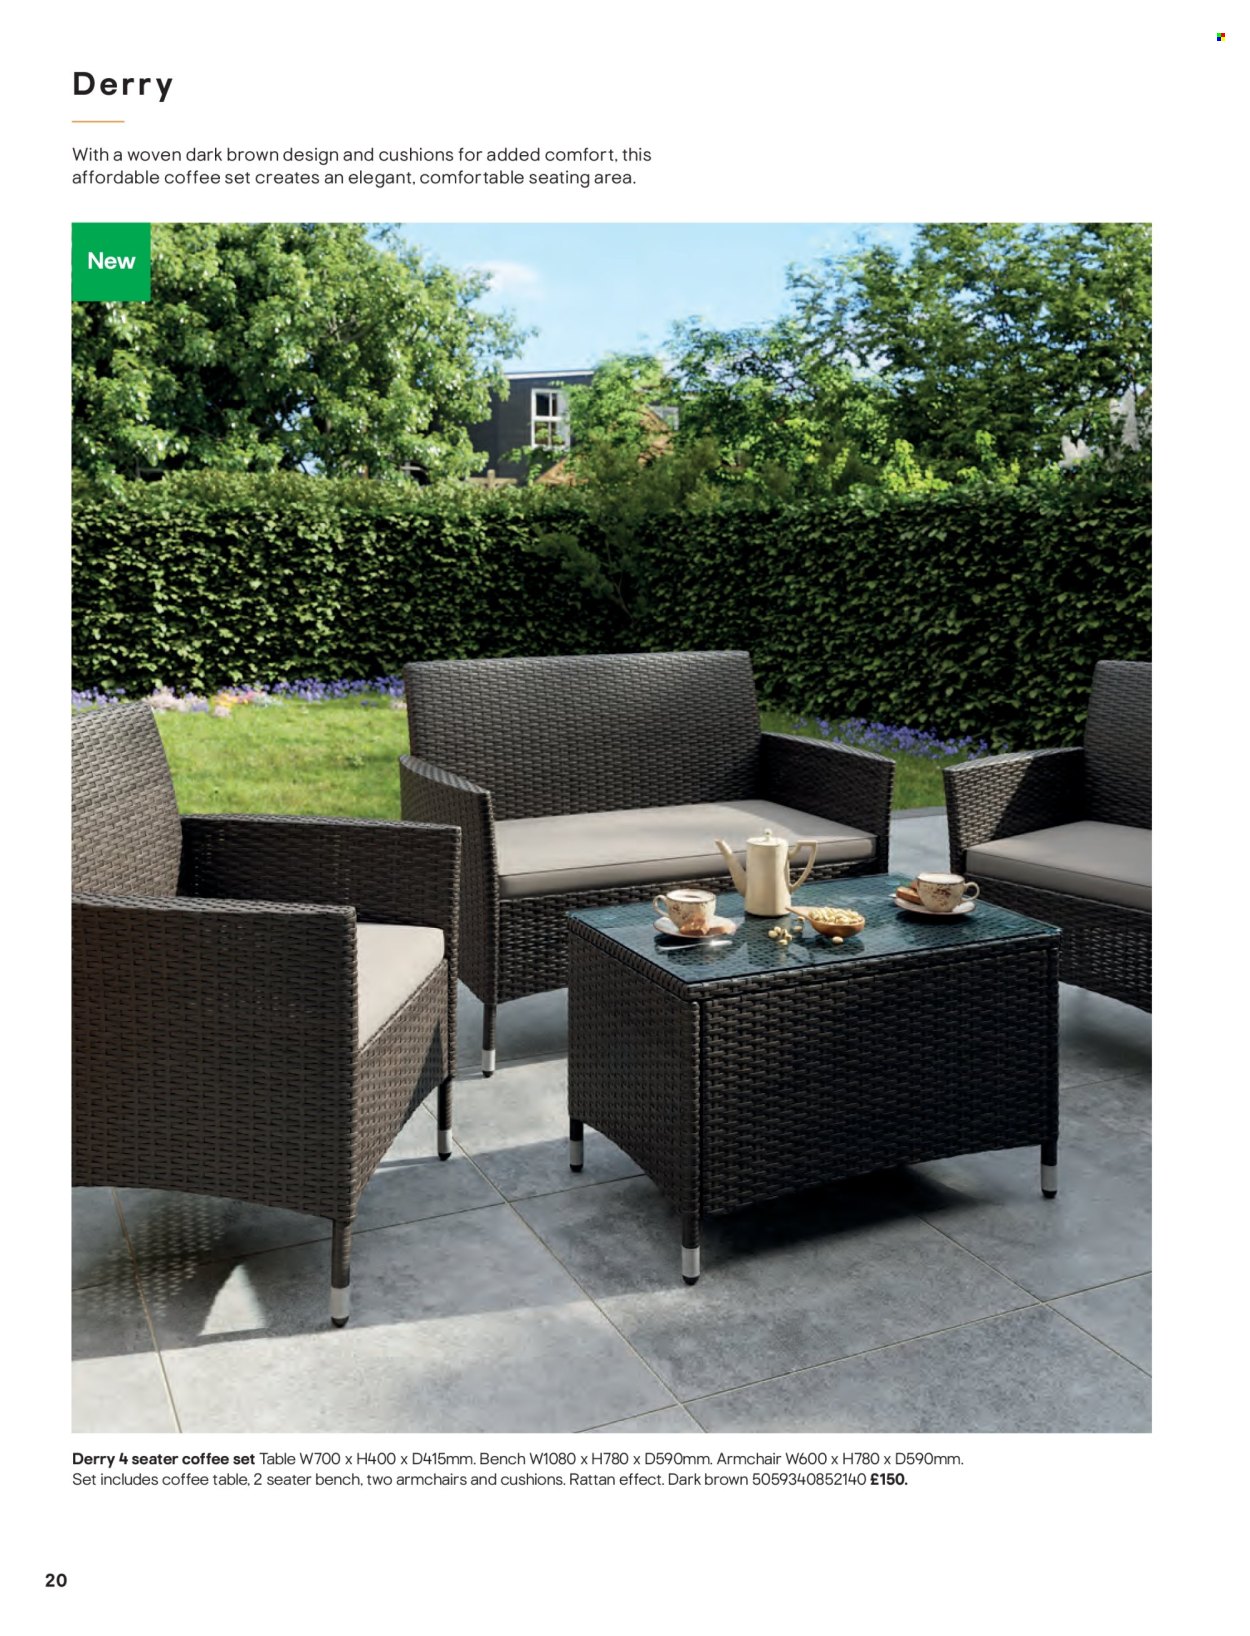 thumbnail - B&Q offer  - Sales products - cushion, table, bench, arm chair, coffee table. Page 20.